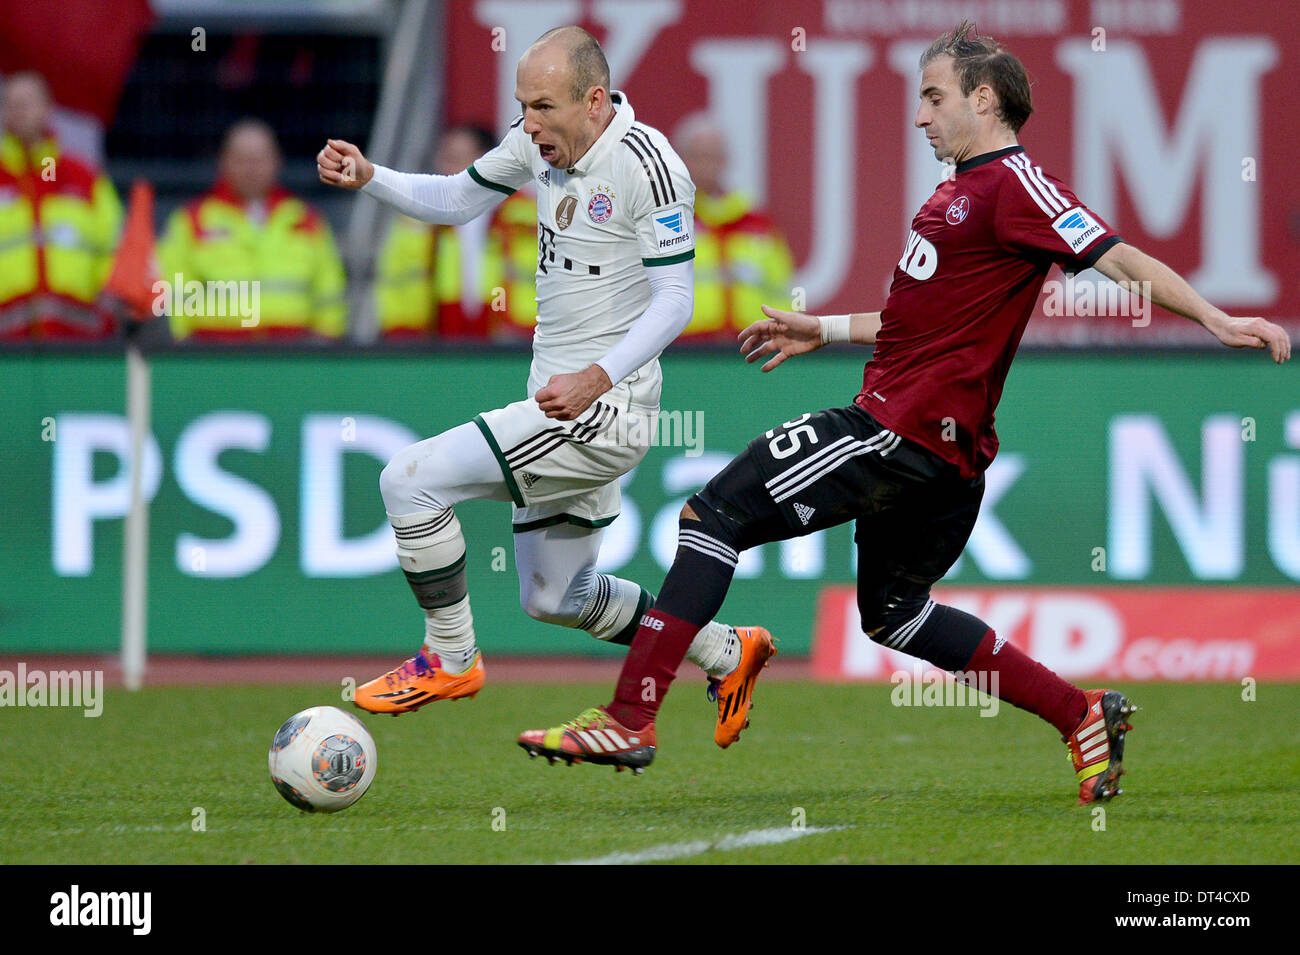 Nuremberg, Germany. 08th Feb, 2014. Munich's Arjen Robben (L) vies for the ball with Nuremberg's Javier Pinola during the Bundesliga soccer match between 1. FC Nuremberg and FC Bayern München at Grundig-Stadium in Nuremberg, Germany, 08 February 2014. Photo: DAVID EBENER/DPA (ATTENTION: Due to the accreditation guidelines, the DFL only permits the publication and utilisation of up to 15 pictures per match on the internet and in online media during the match.)/dpa/Alamy Live News Stock Photo